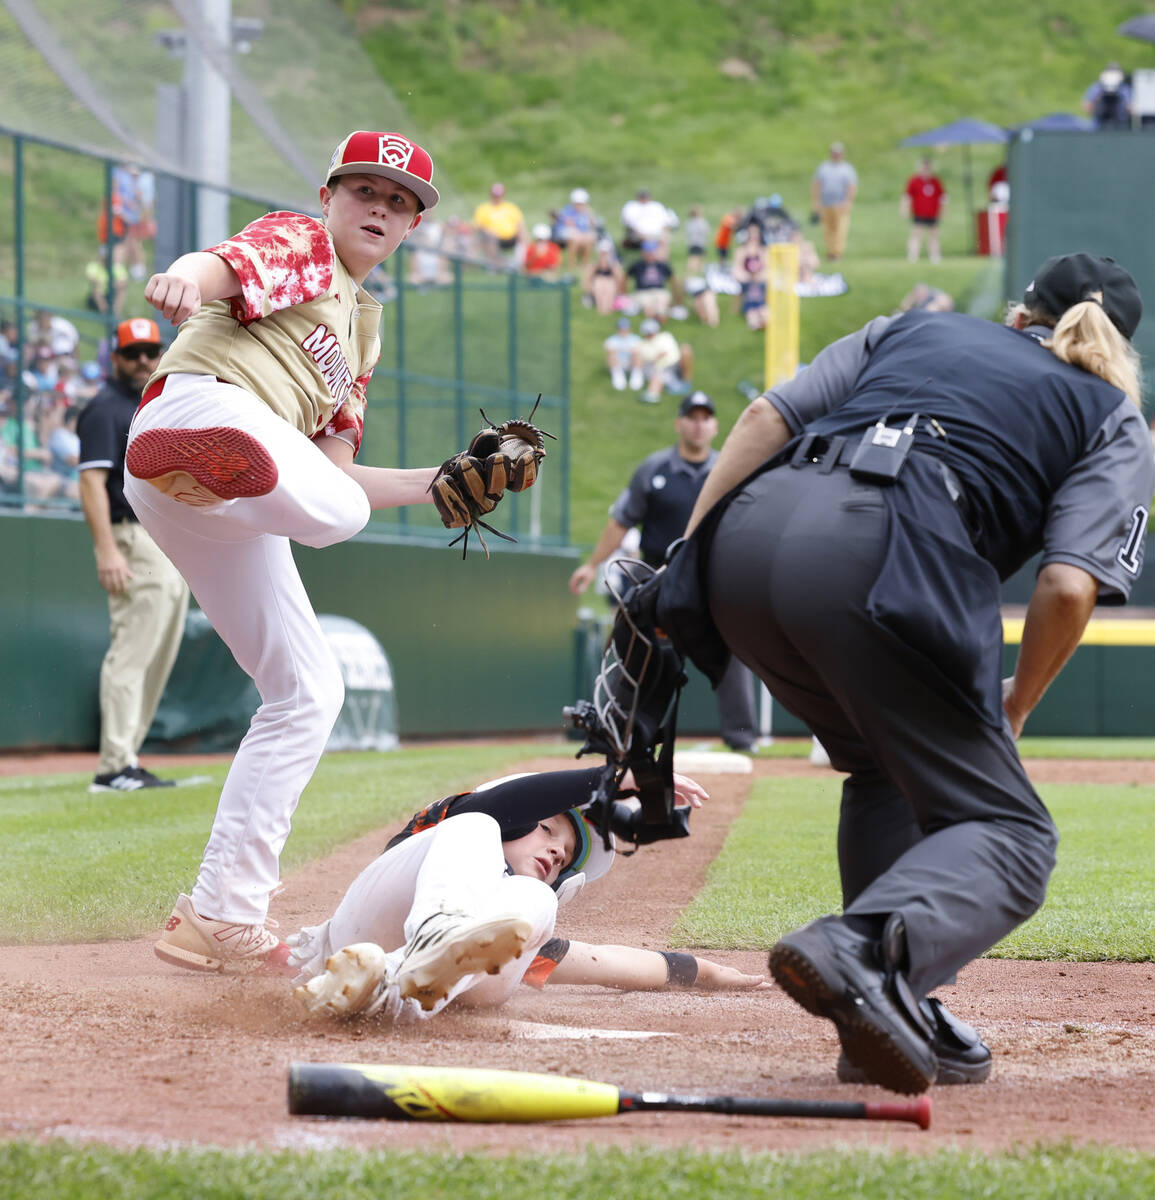 Rhode Island's John Wozniak is tagged out at home by the Henderson All-Stars pitcher Logan Leva ...